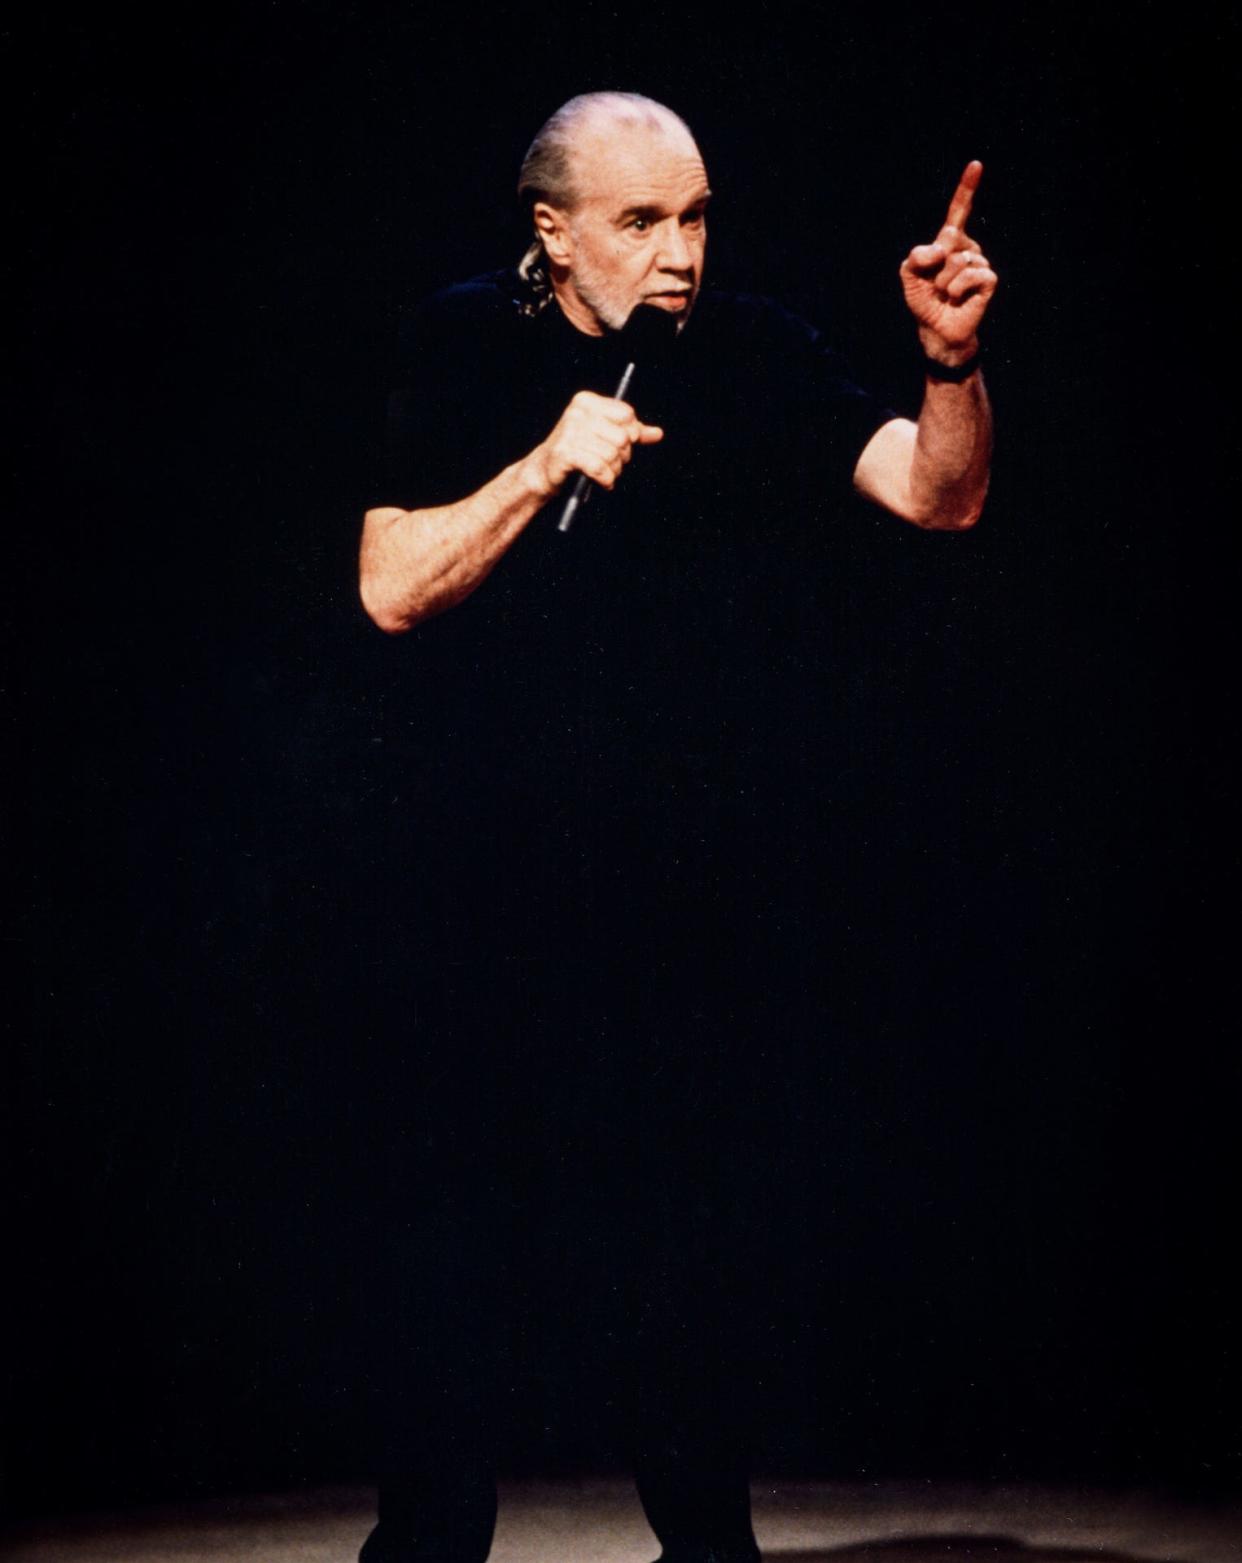 George Carlin in a still from the HBO documentary, "George Carlin's American Dream."